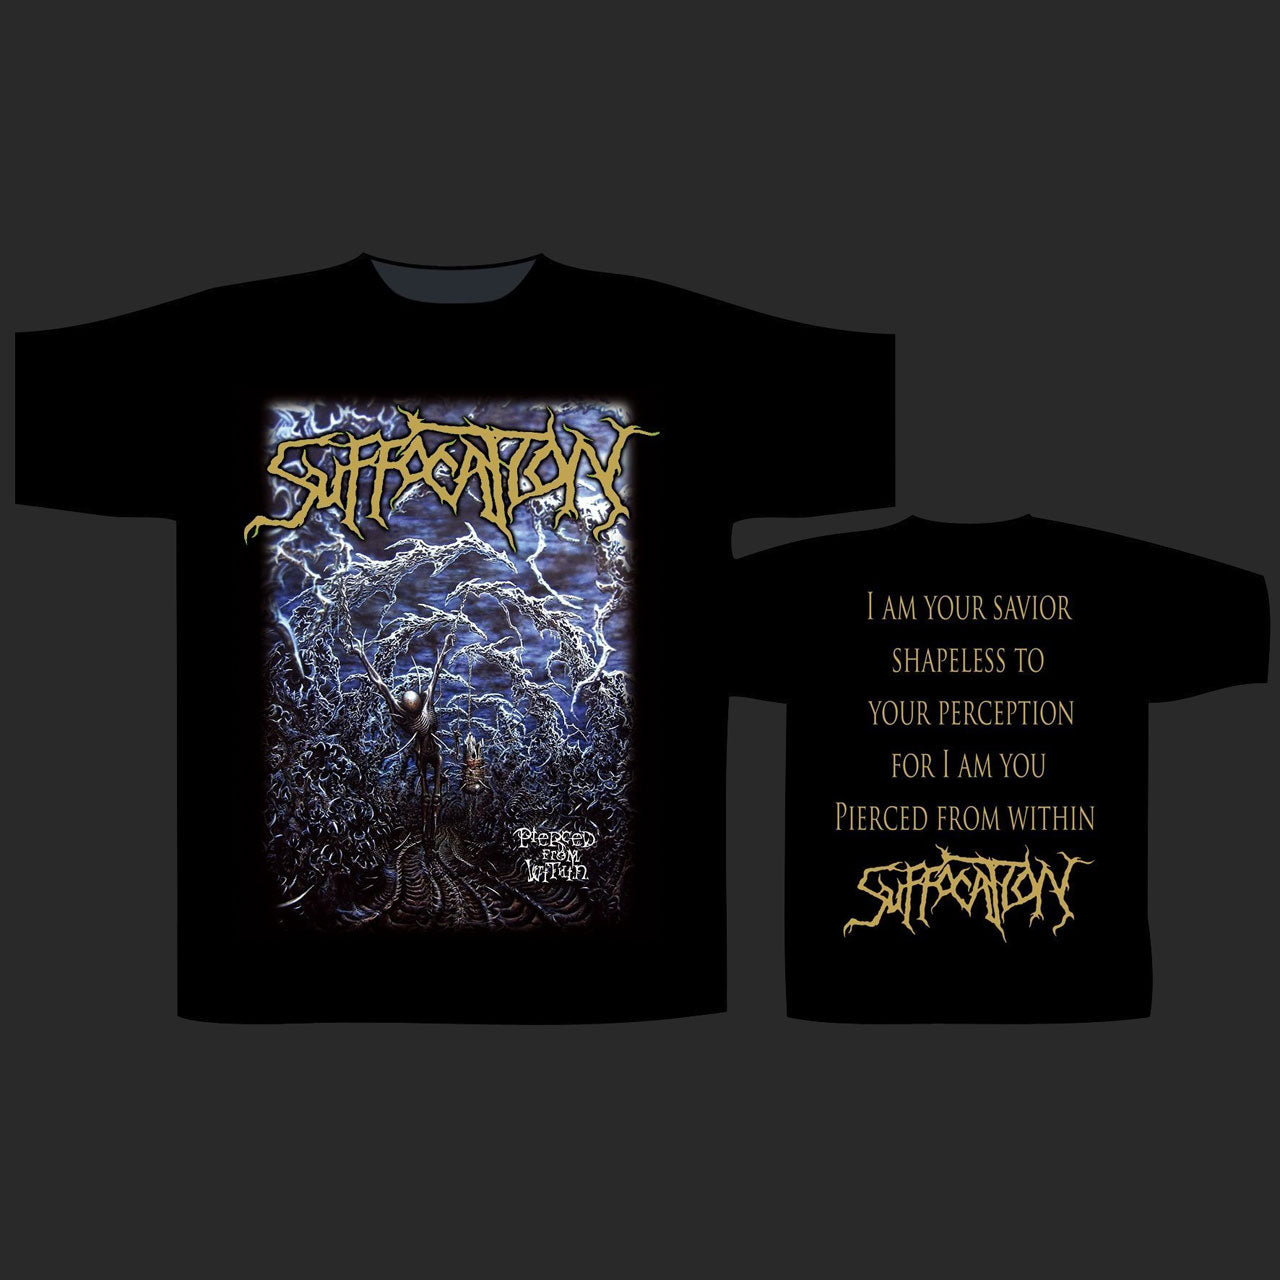 Suffocation - Pierced from Within (T-Shirt)